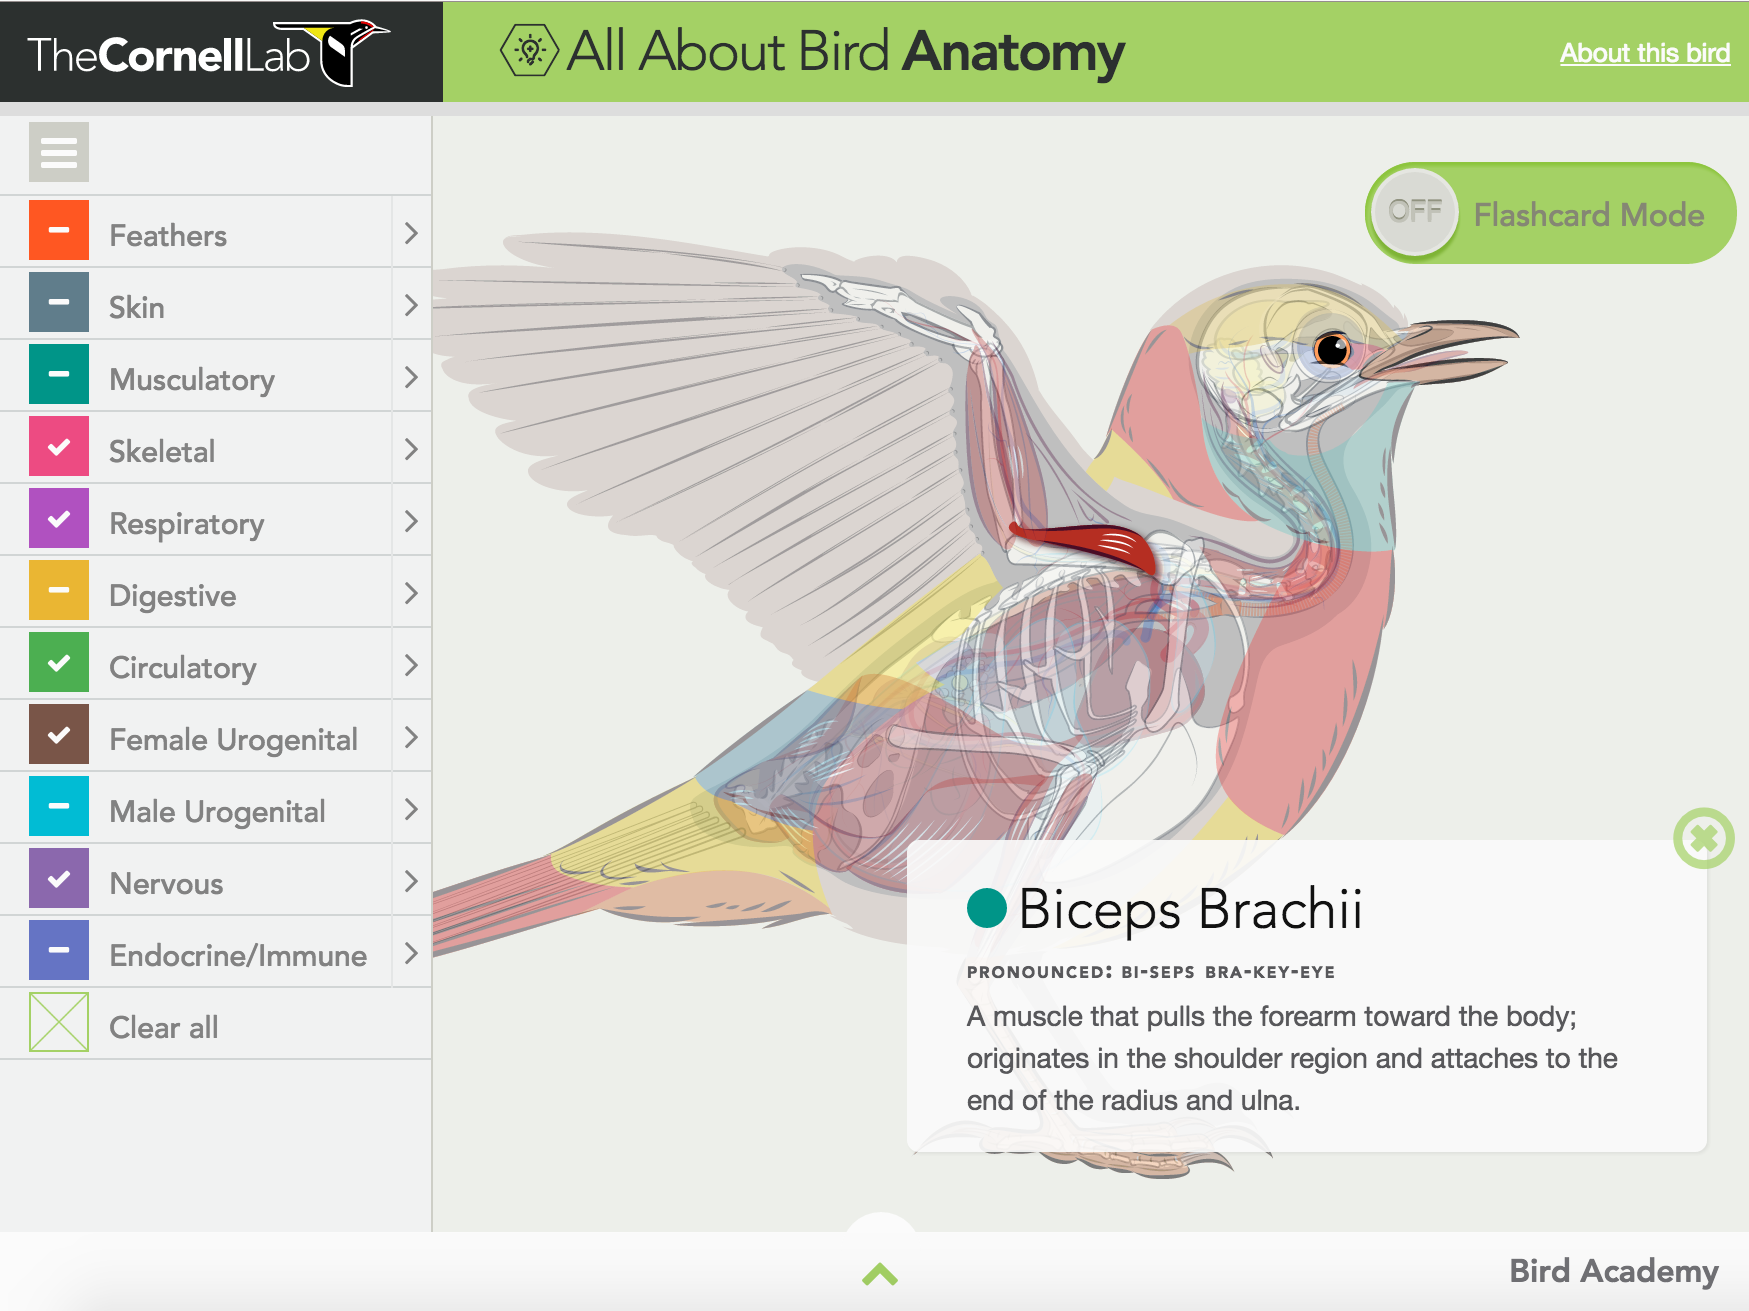 New on GameUp: All About Bird Anatomy